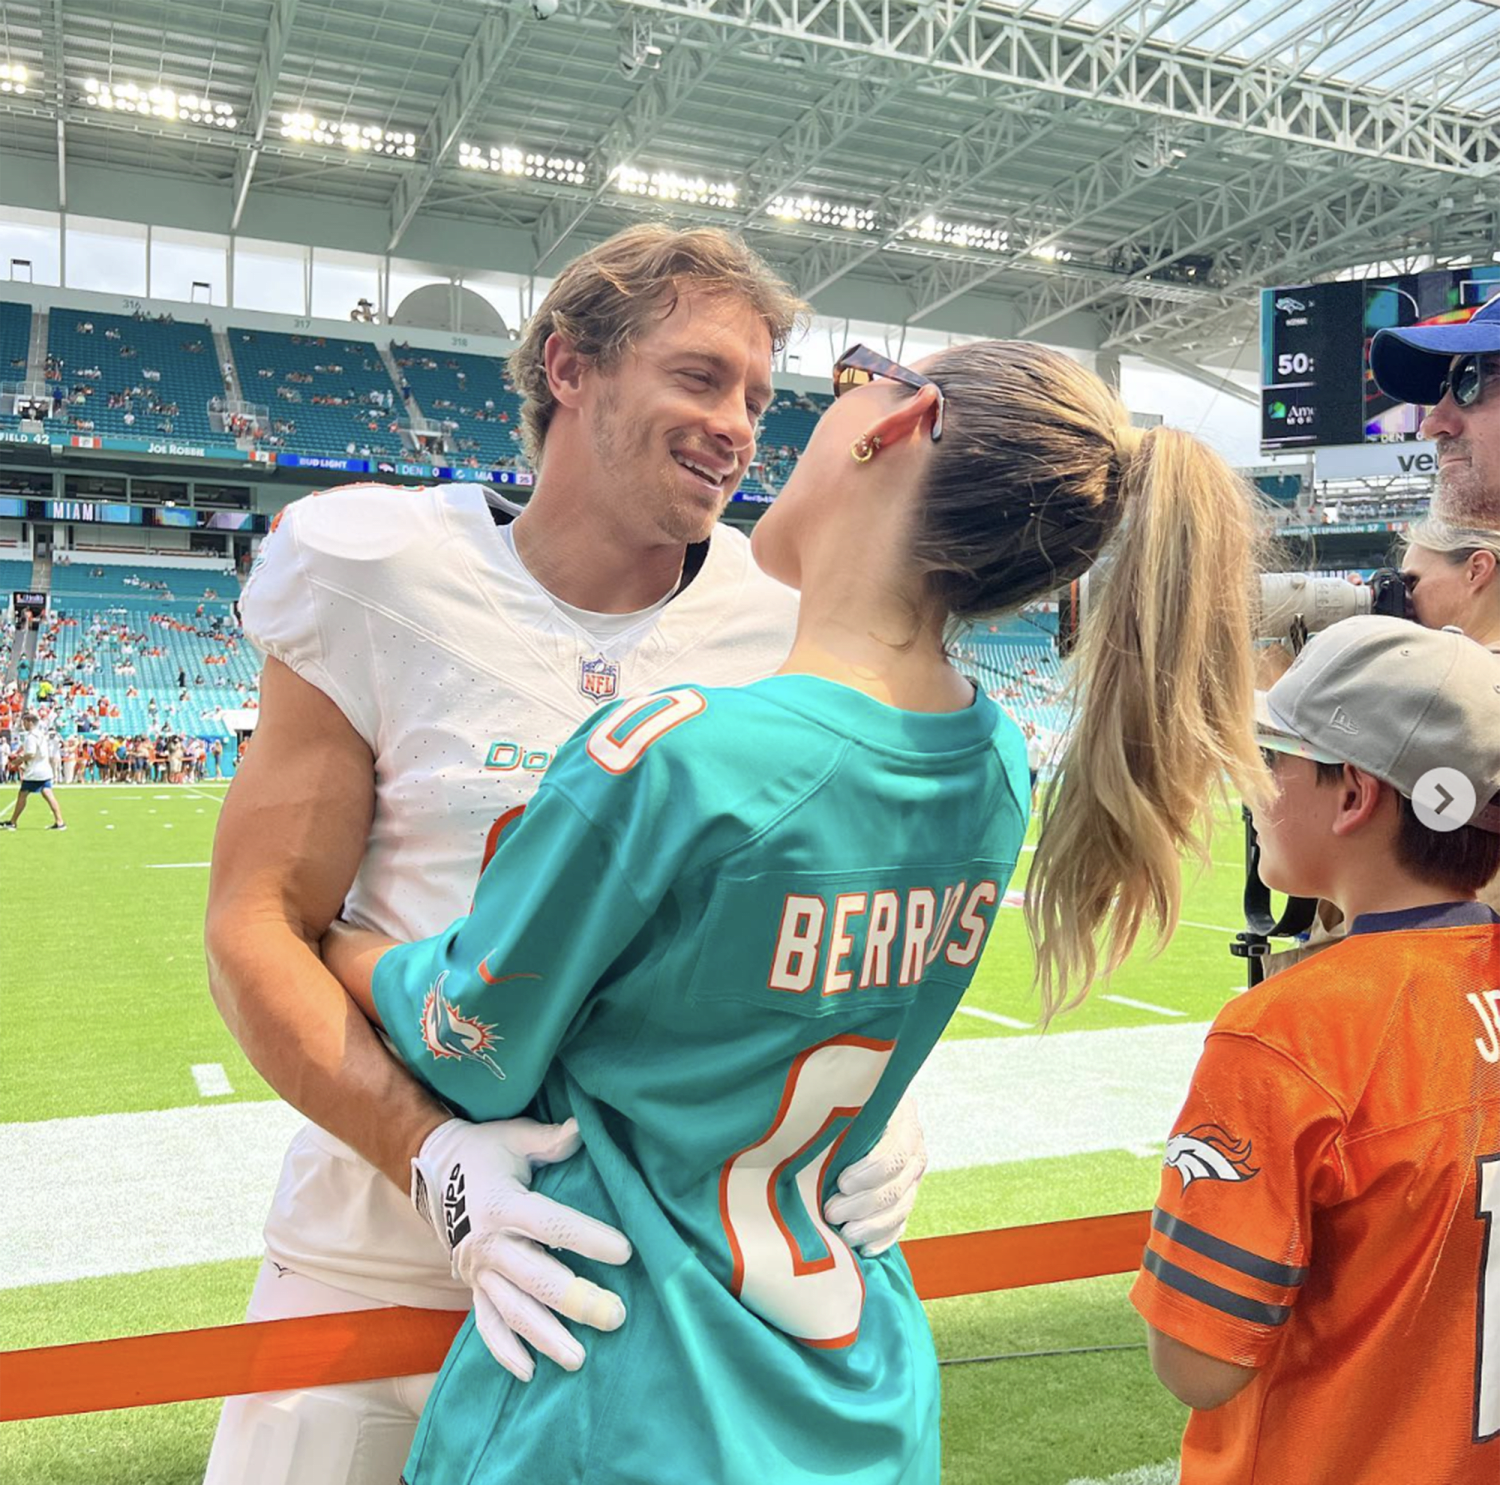 Alix Earle confirms romance with NFL player Braxton Berrios